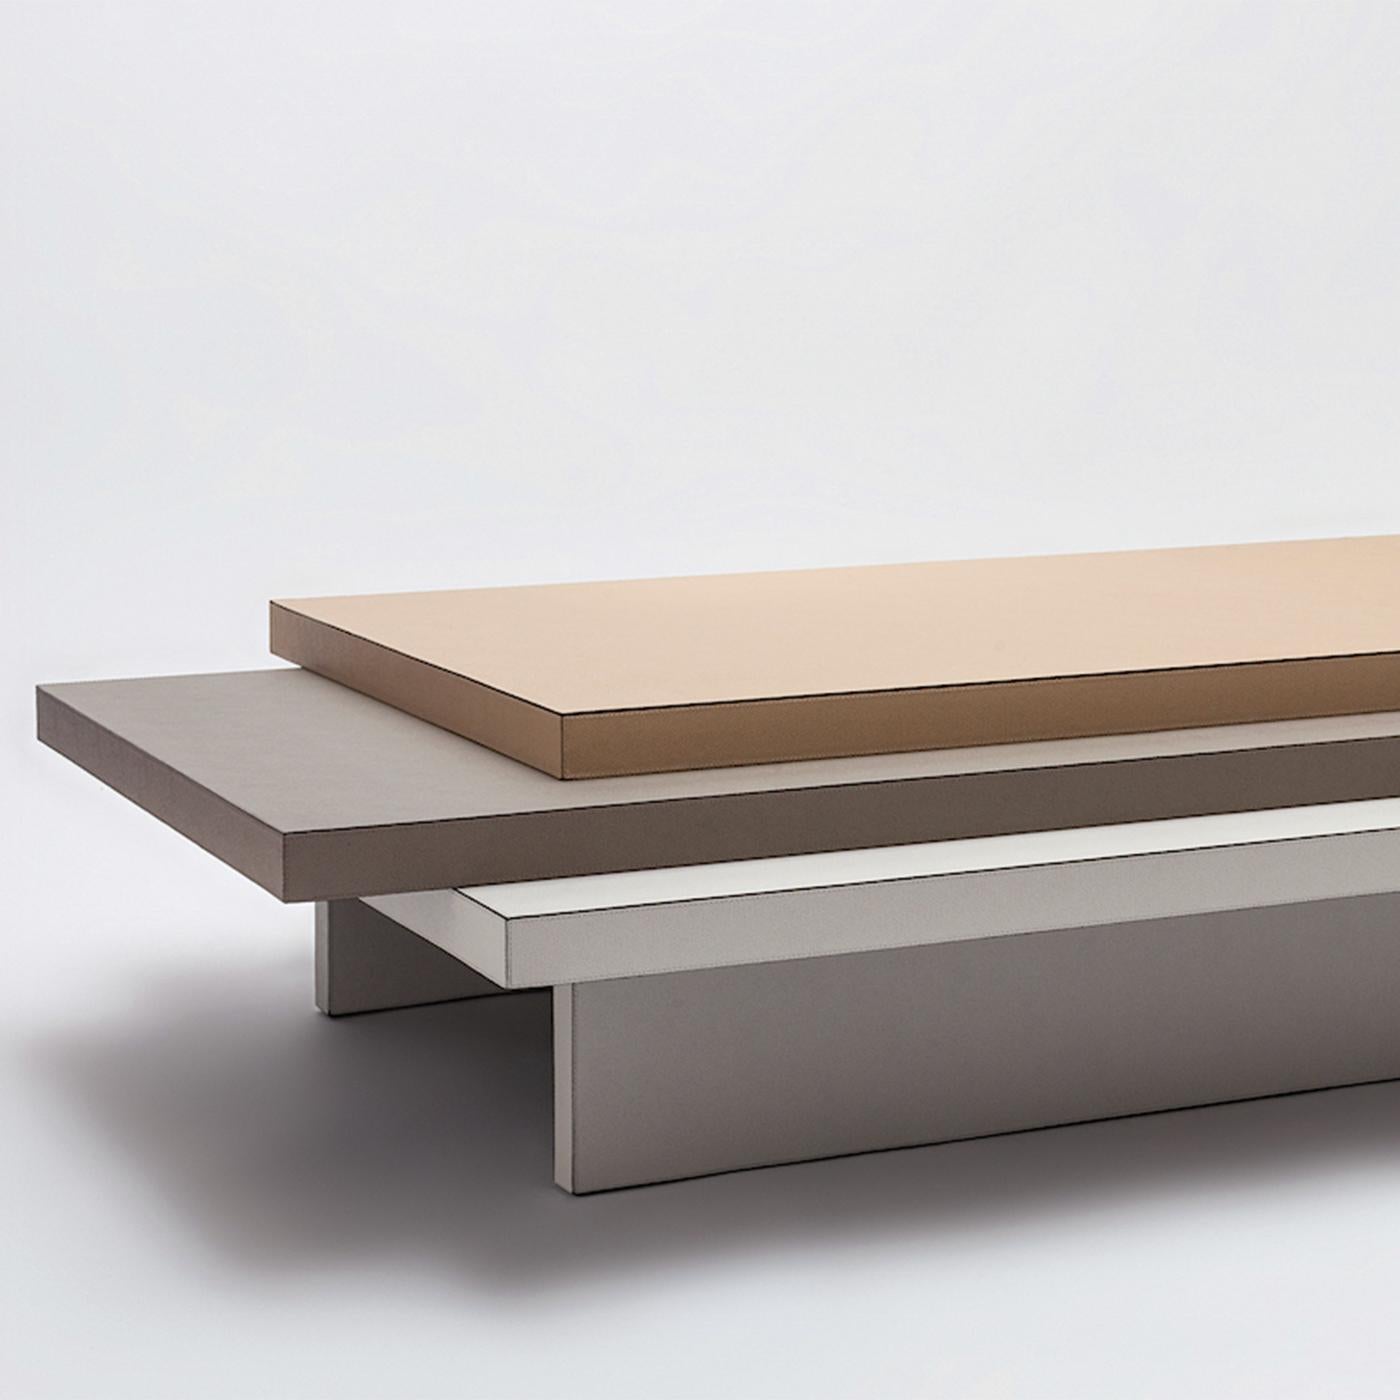 Coffee table Jedha with all structure in solid wood covered with
grained genuine leather, upper top covered in brown leather, middle
table topcovered in grey leather and bottom top and base covered in 
white leather.